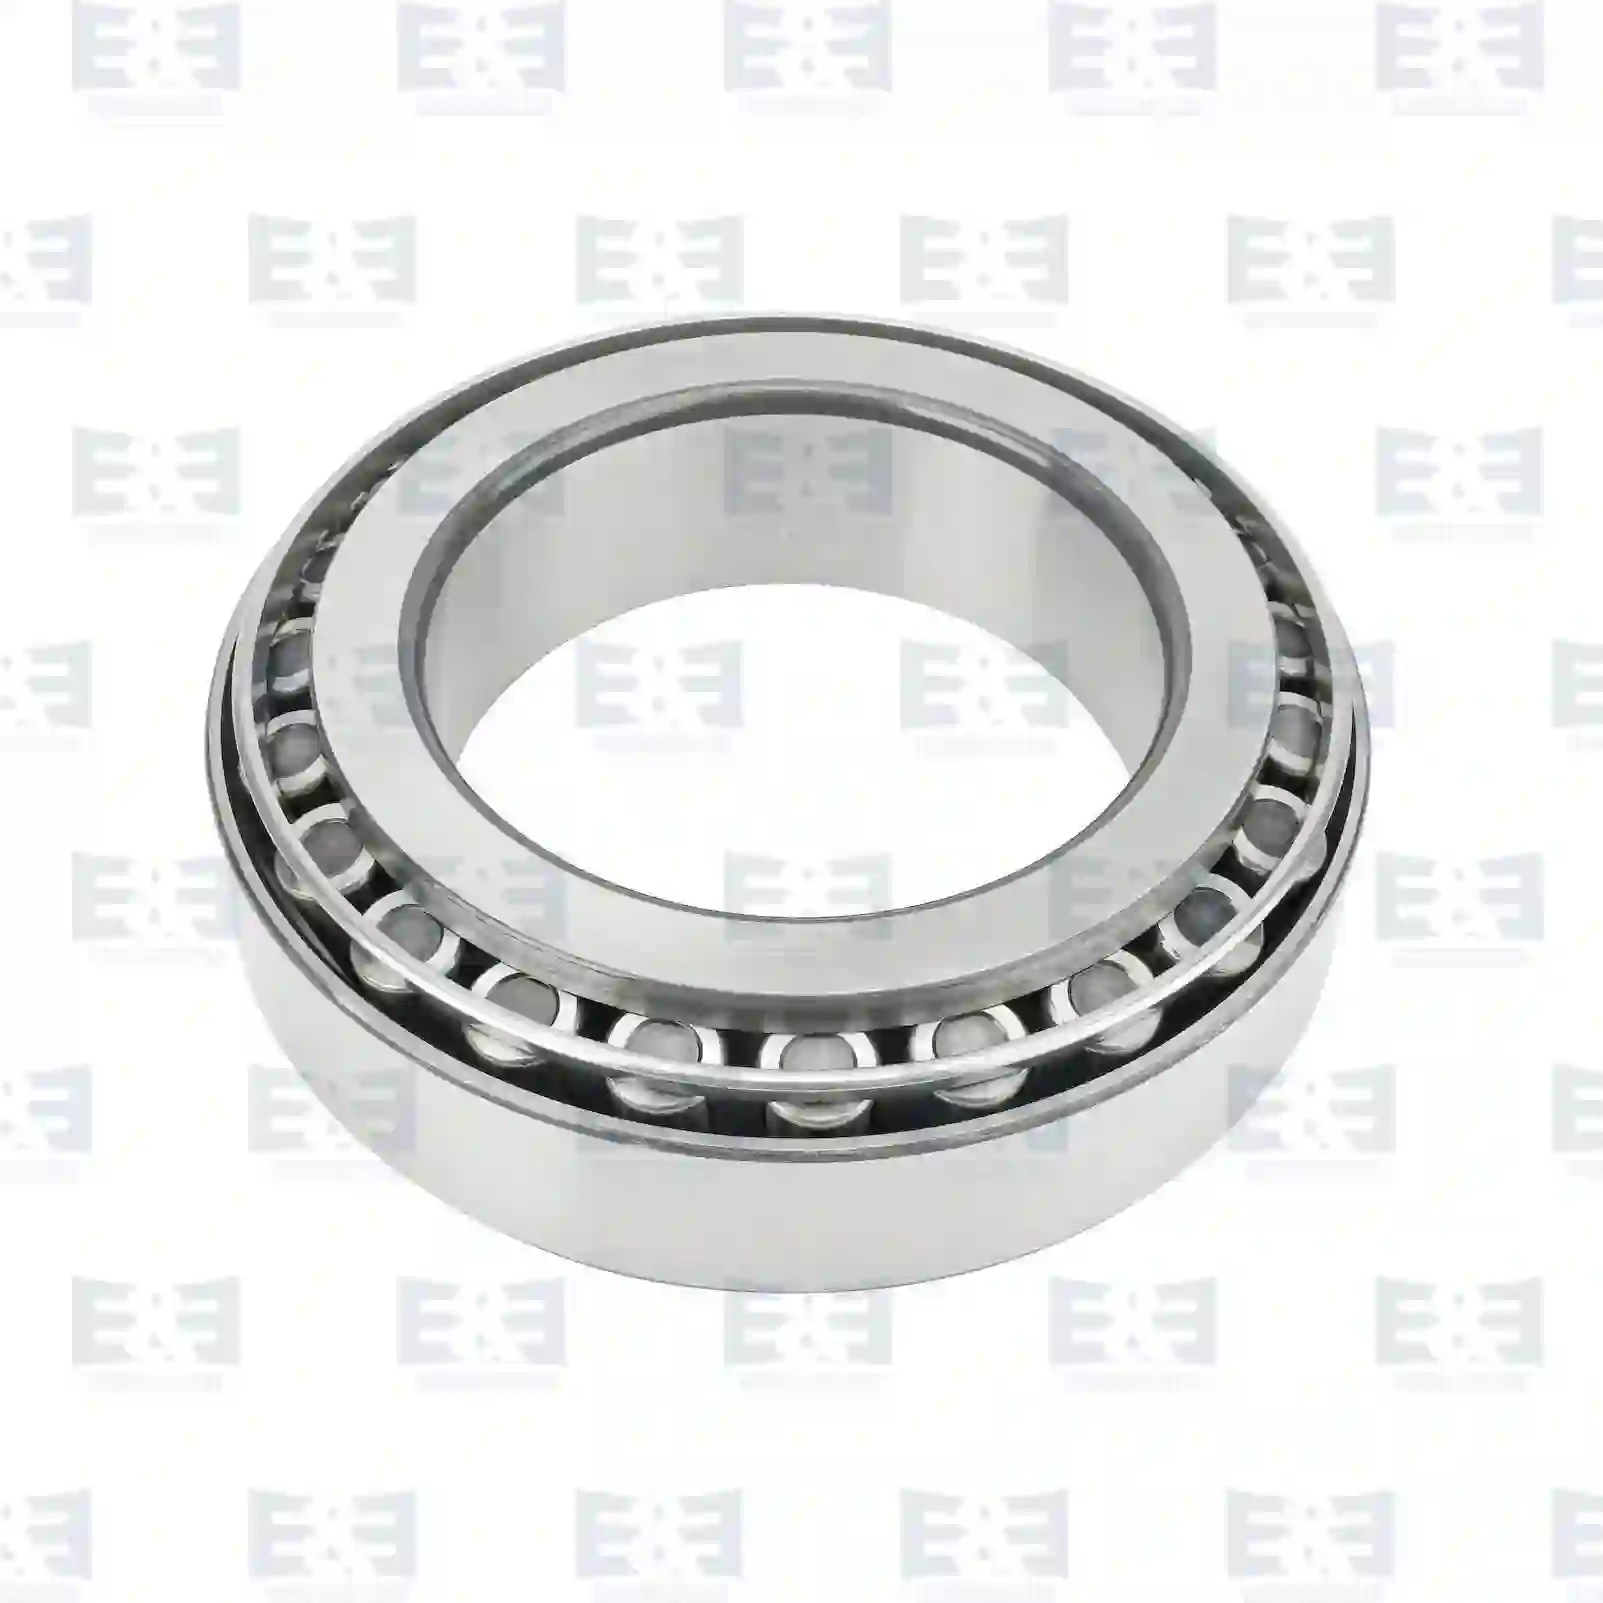 Bearings Tapered roller bearing, EE No 2E2286481 ,  oem no:9442156, 08194959, 0023336046, 0023336123, 0959901205, 3661013900, 324791025000, JHM72024999401, 2V2501319B E&E Truck Spare Parts | Truck Spare Parts, Auotomotive Spare Parts